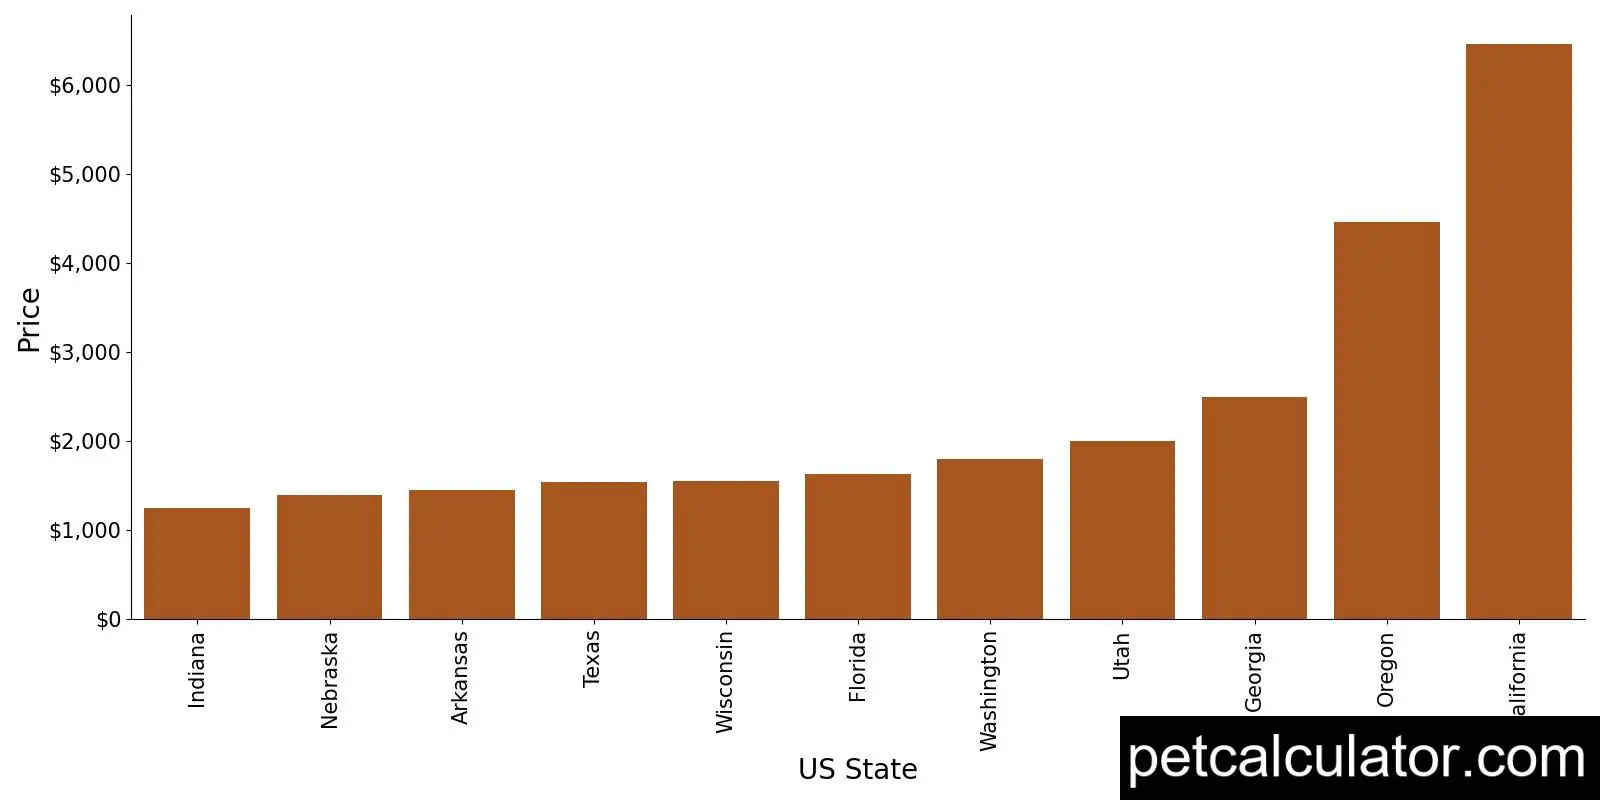 Price of Basenji by US State 